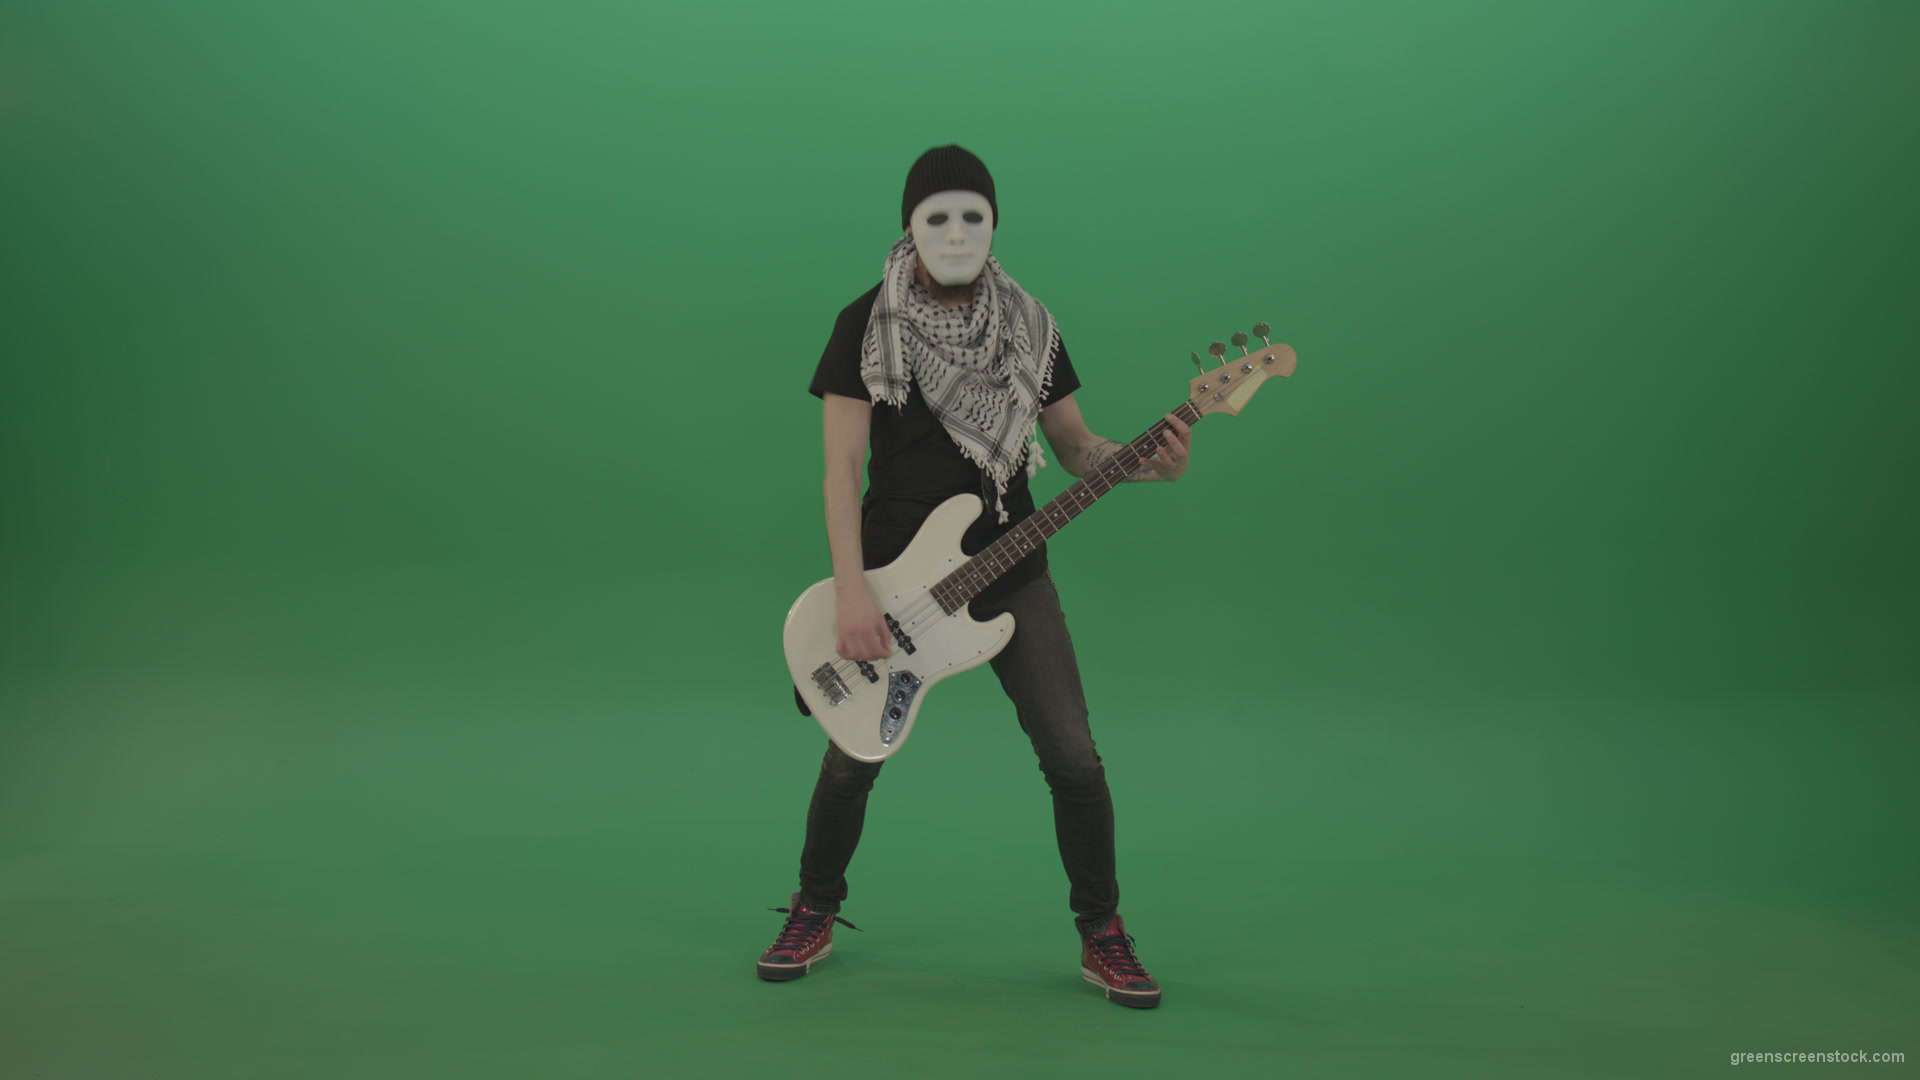 Bass-guitaris-in-full-size-play-white-guitar-in-white-mask-on-chromakey-green-screen_007 Green Screen Stock